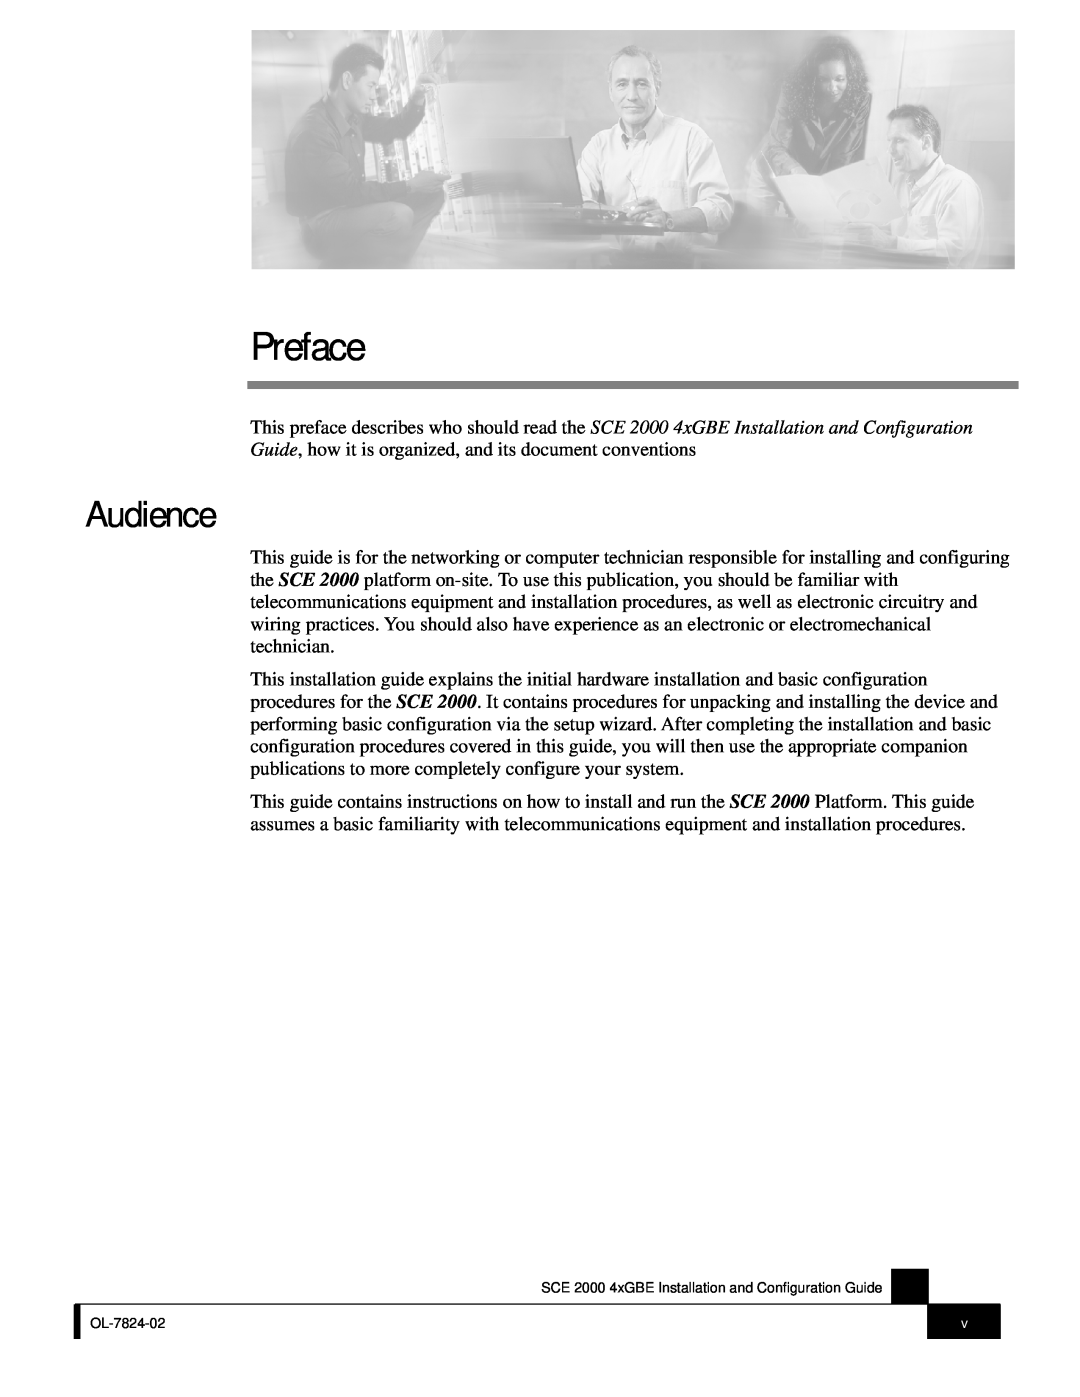 Cisco Systems SCE 2000 4xGBE manual Preface, Audience 